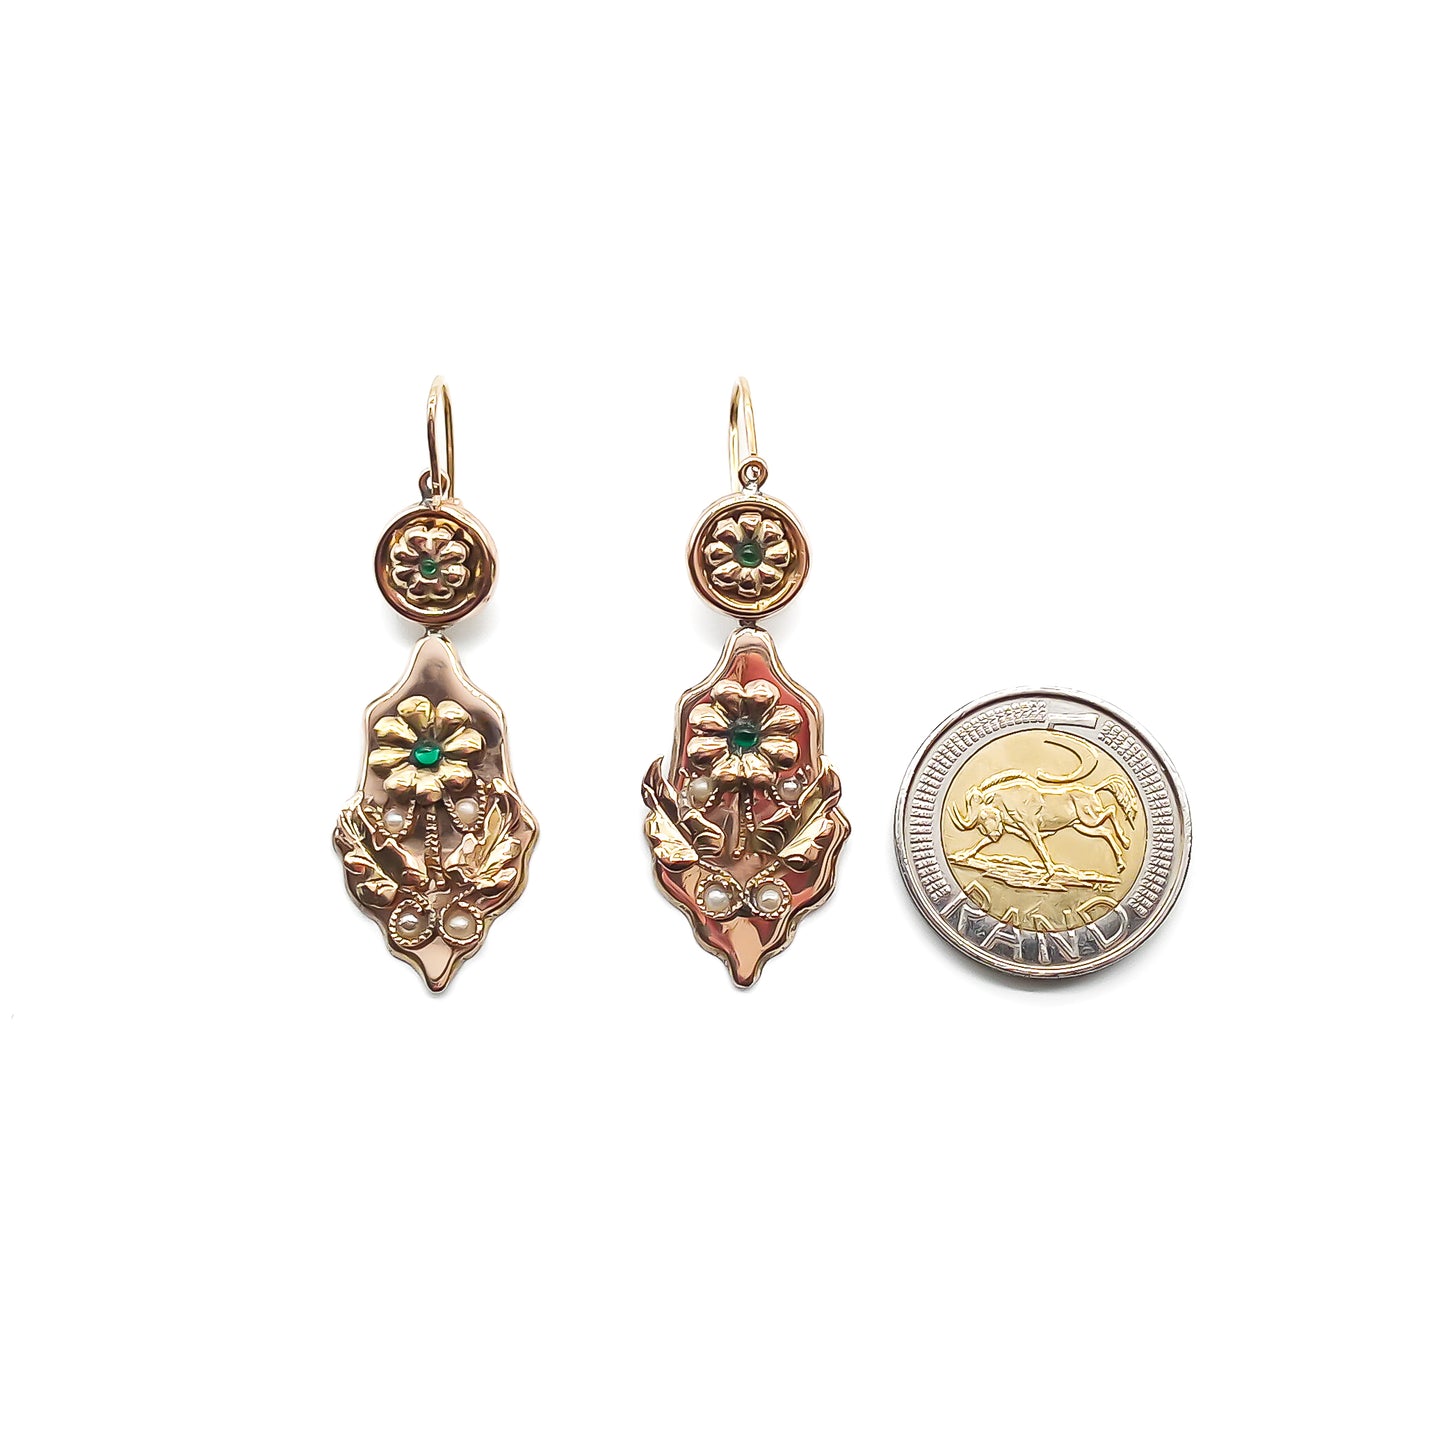 Stunning antique 18ct rose gold drop earrings, each set with two cabochon emeralds and four seed pearls in a floral design. Italy